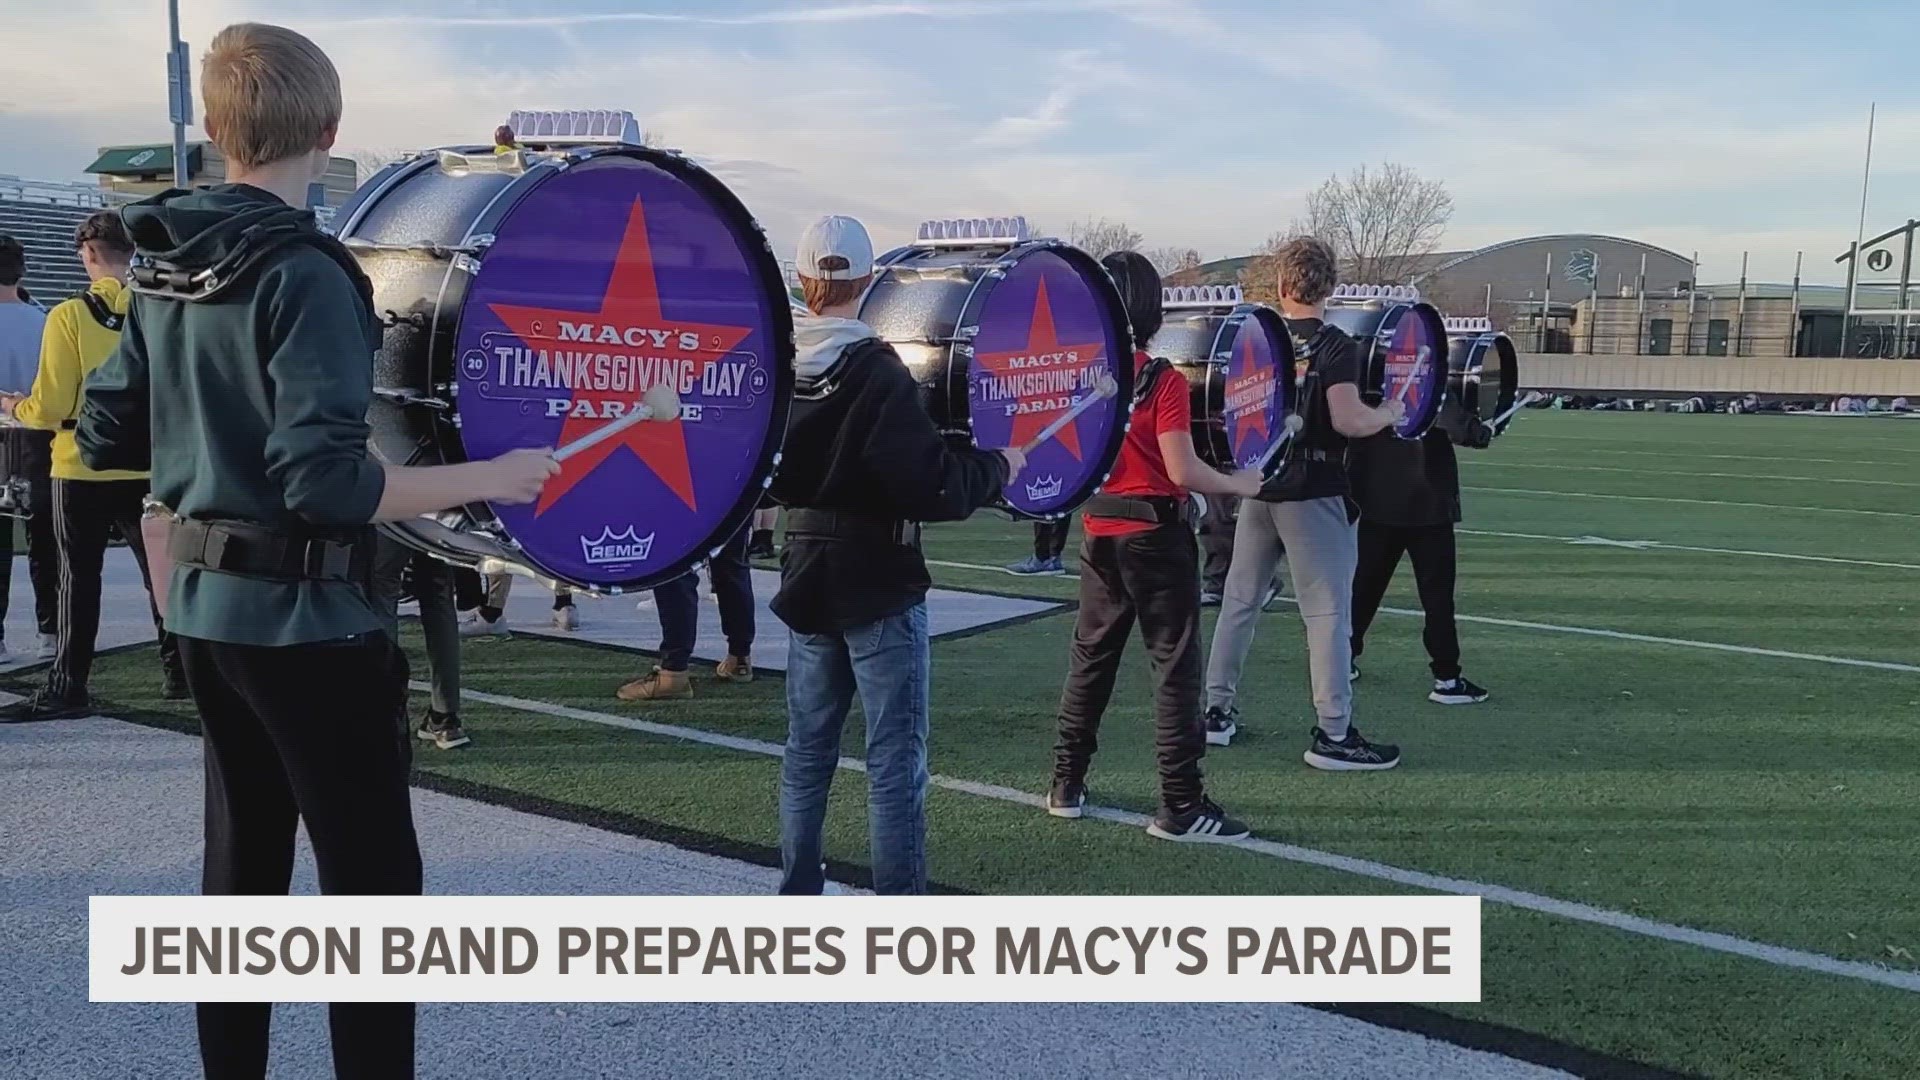 Jenison Marching Band prepares for Macy's Thanksgiving Day Parade